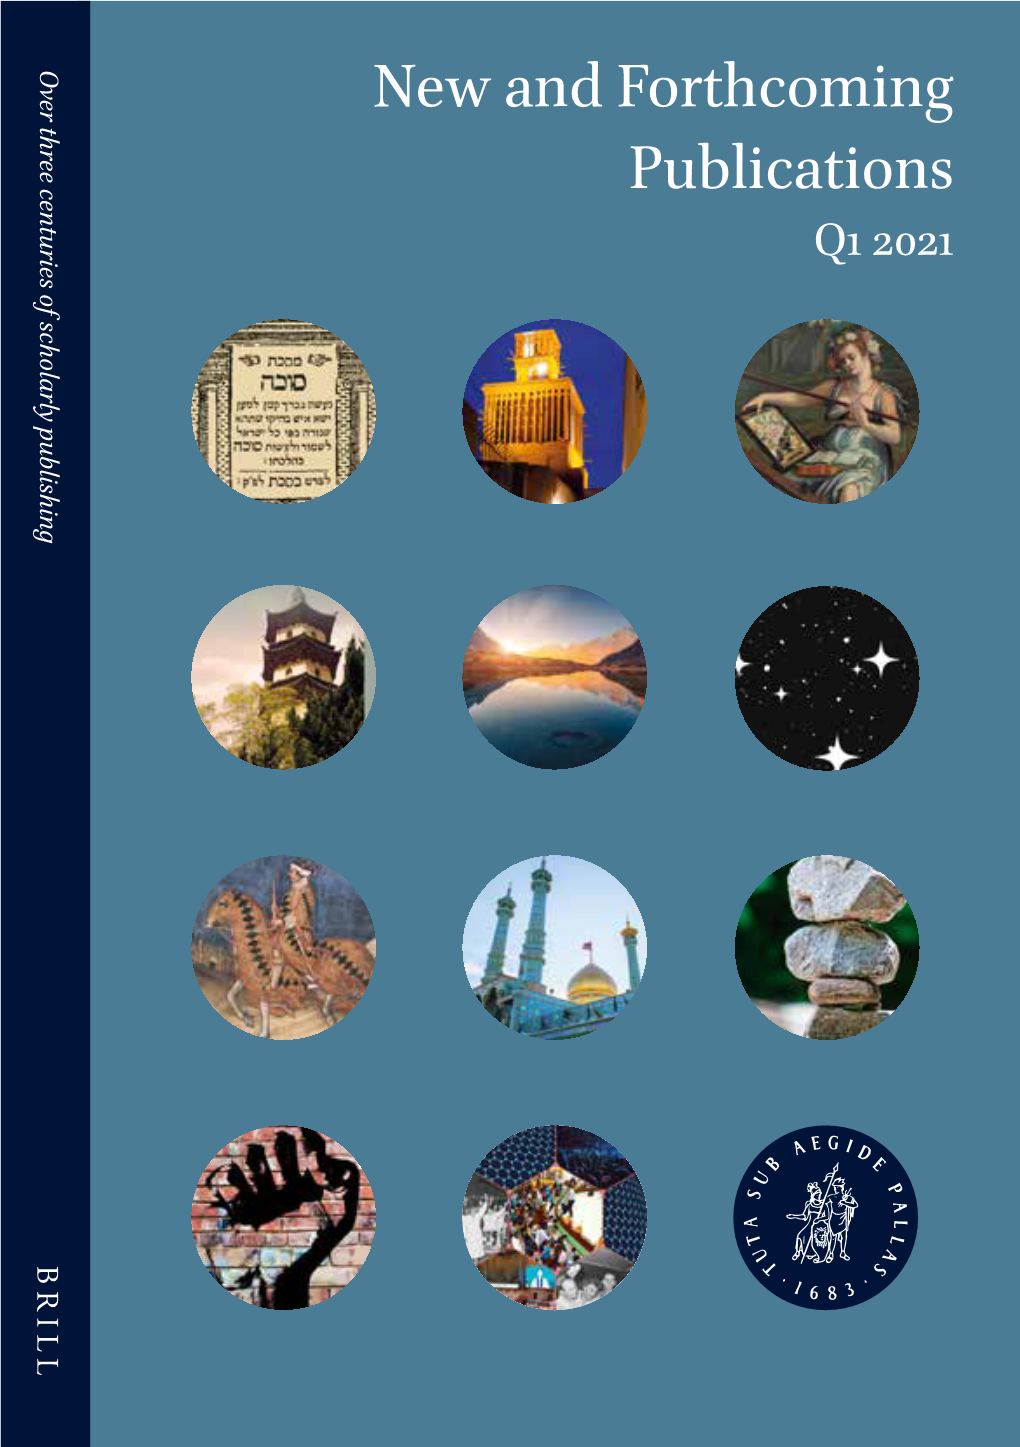 New and Forthcoming Publications Q1 2021 Contents